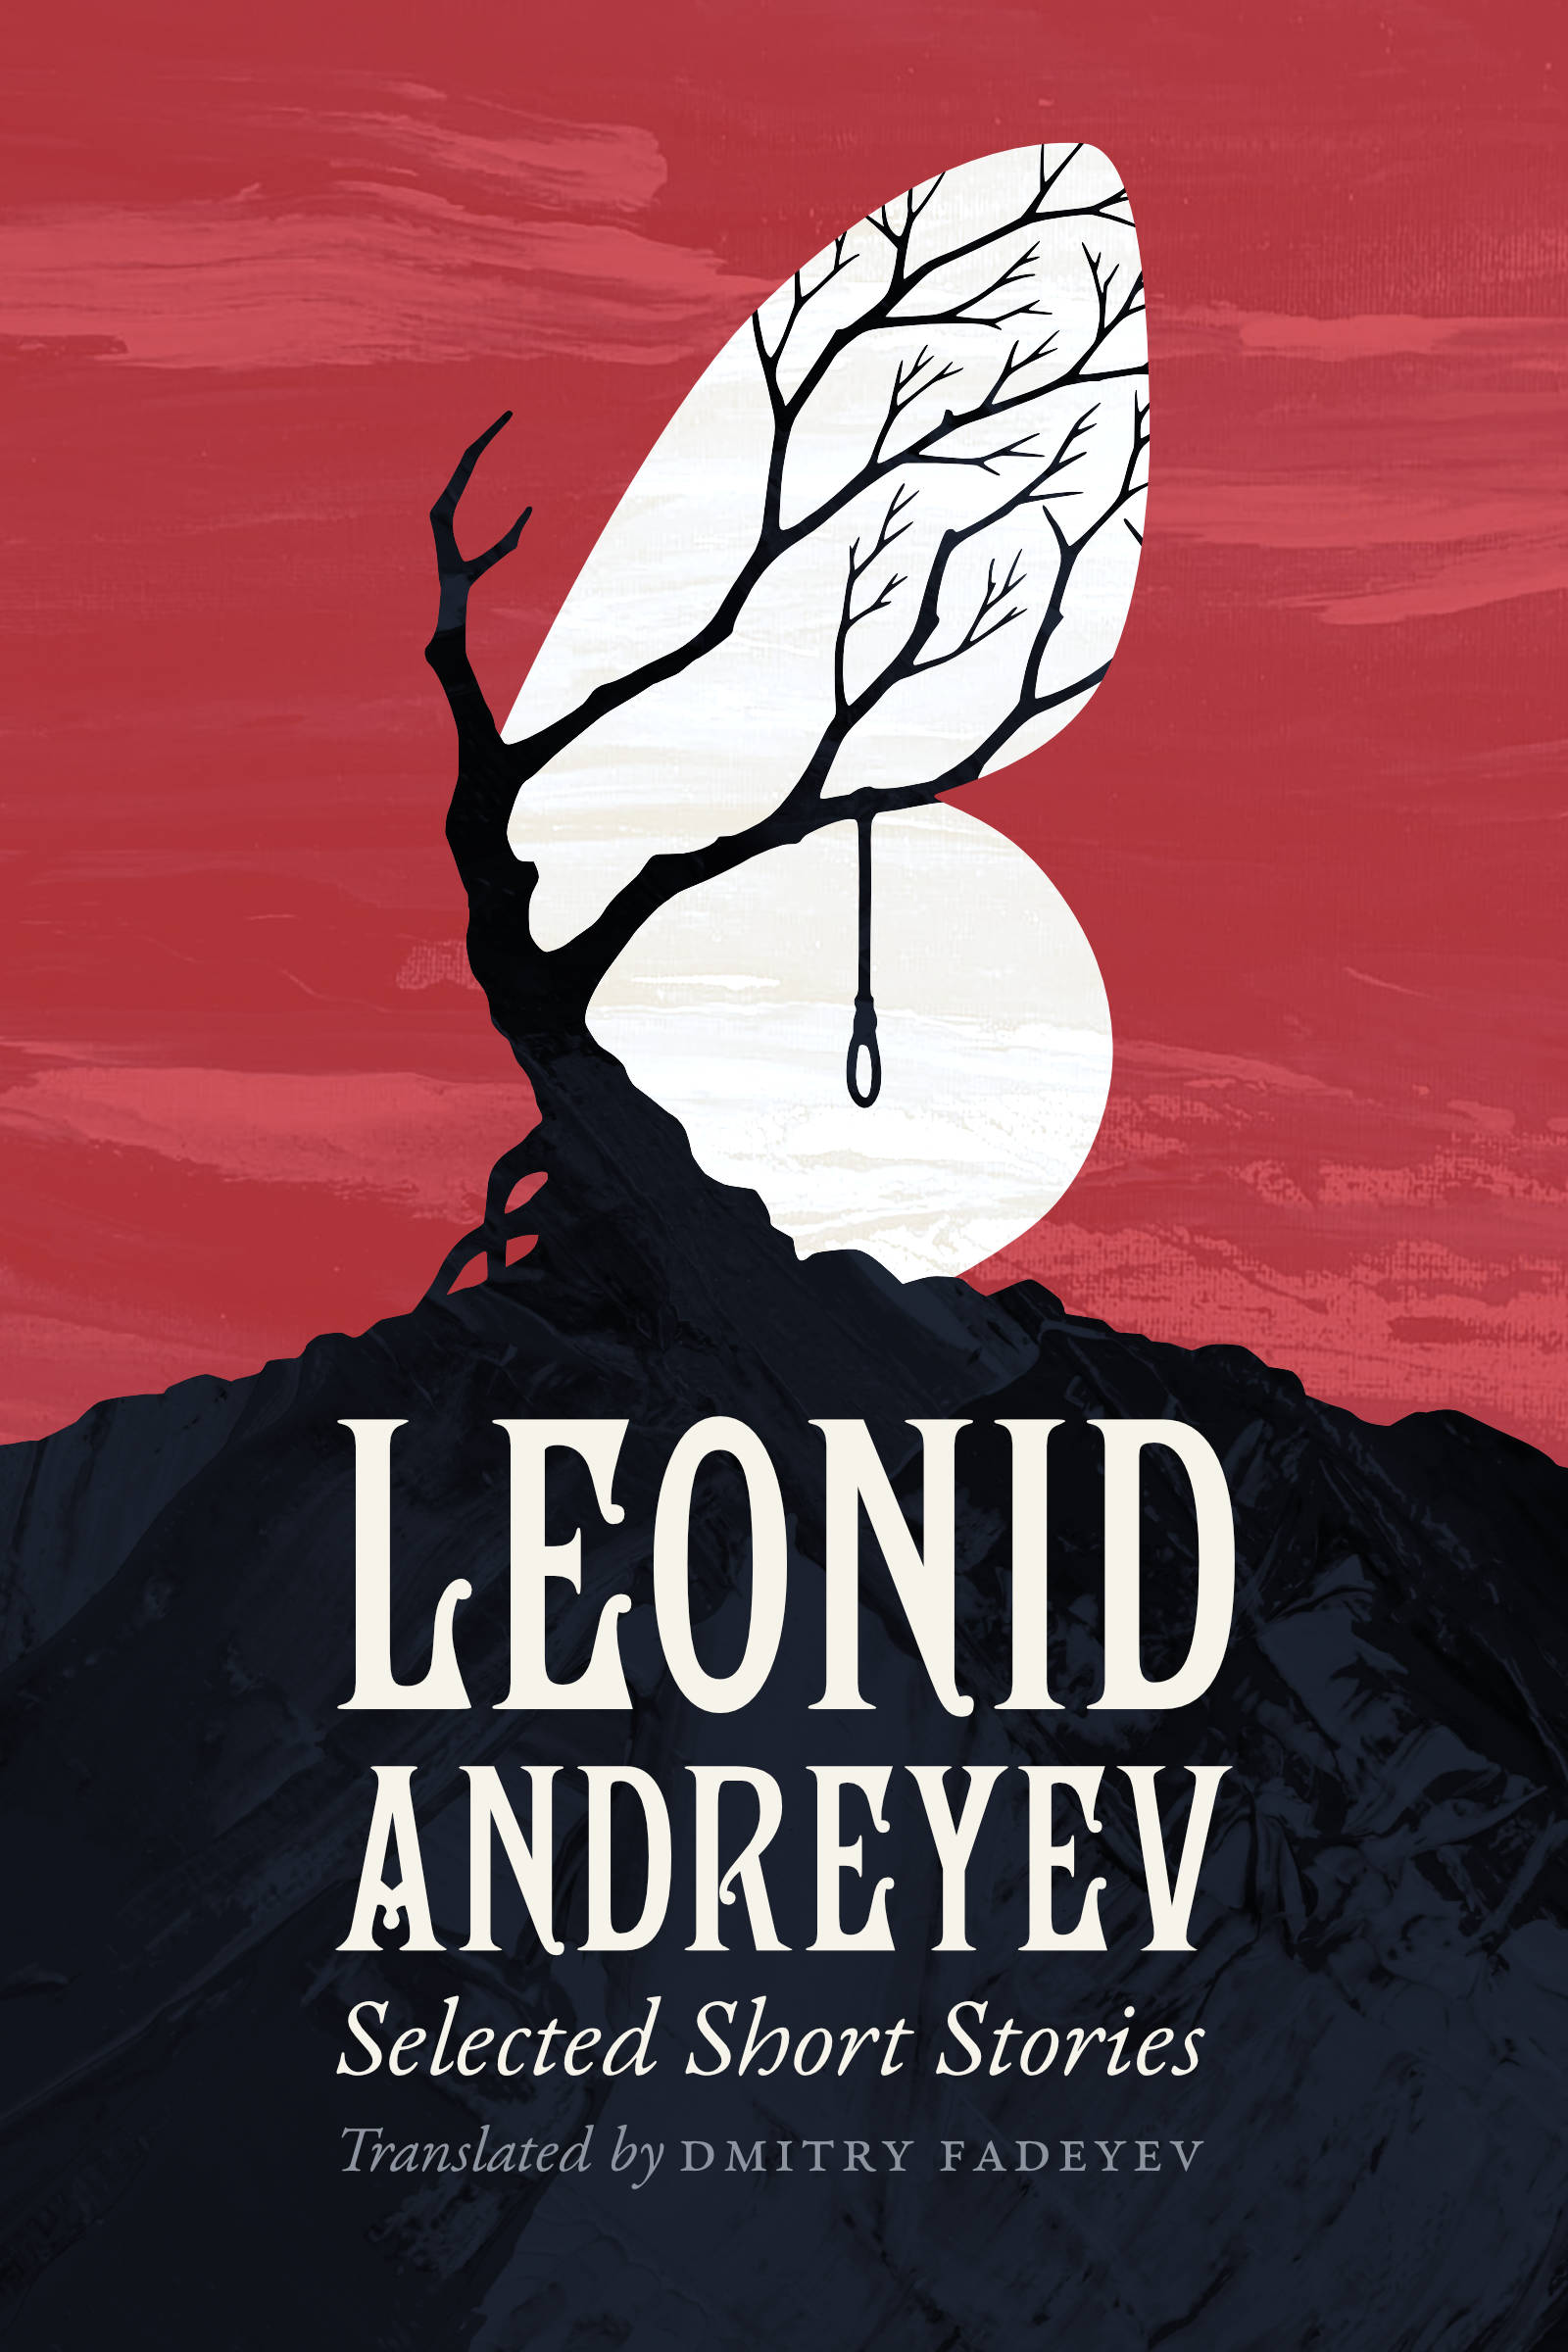 Selected Short Stories by Leonid Andreyev. Translated by Dmitry Fadeyev. Cover image: a dark silhouette of a lonely, leafless, crooked tree atop a mountain with branches turned to one side on a red background. A rope with a noose is tied to branch. An abstract white background in the form of a butterfly wing is placed behind the branches, transforming the silhoutte into a white butterfly with a black vein pattern running across the wings.